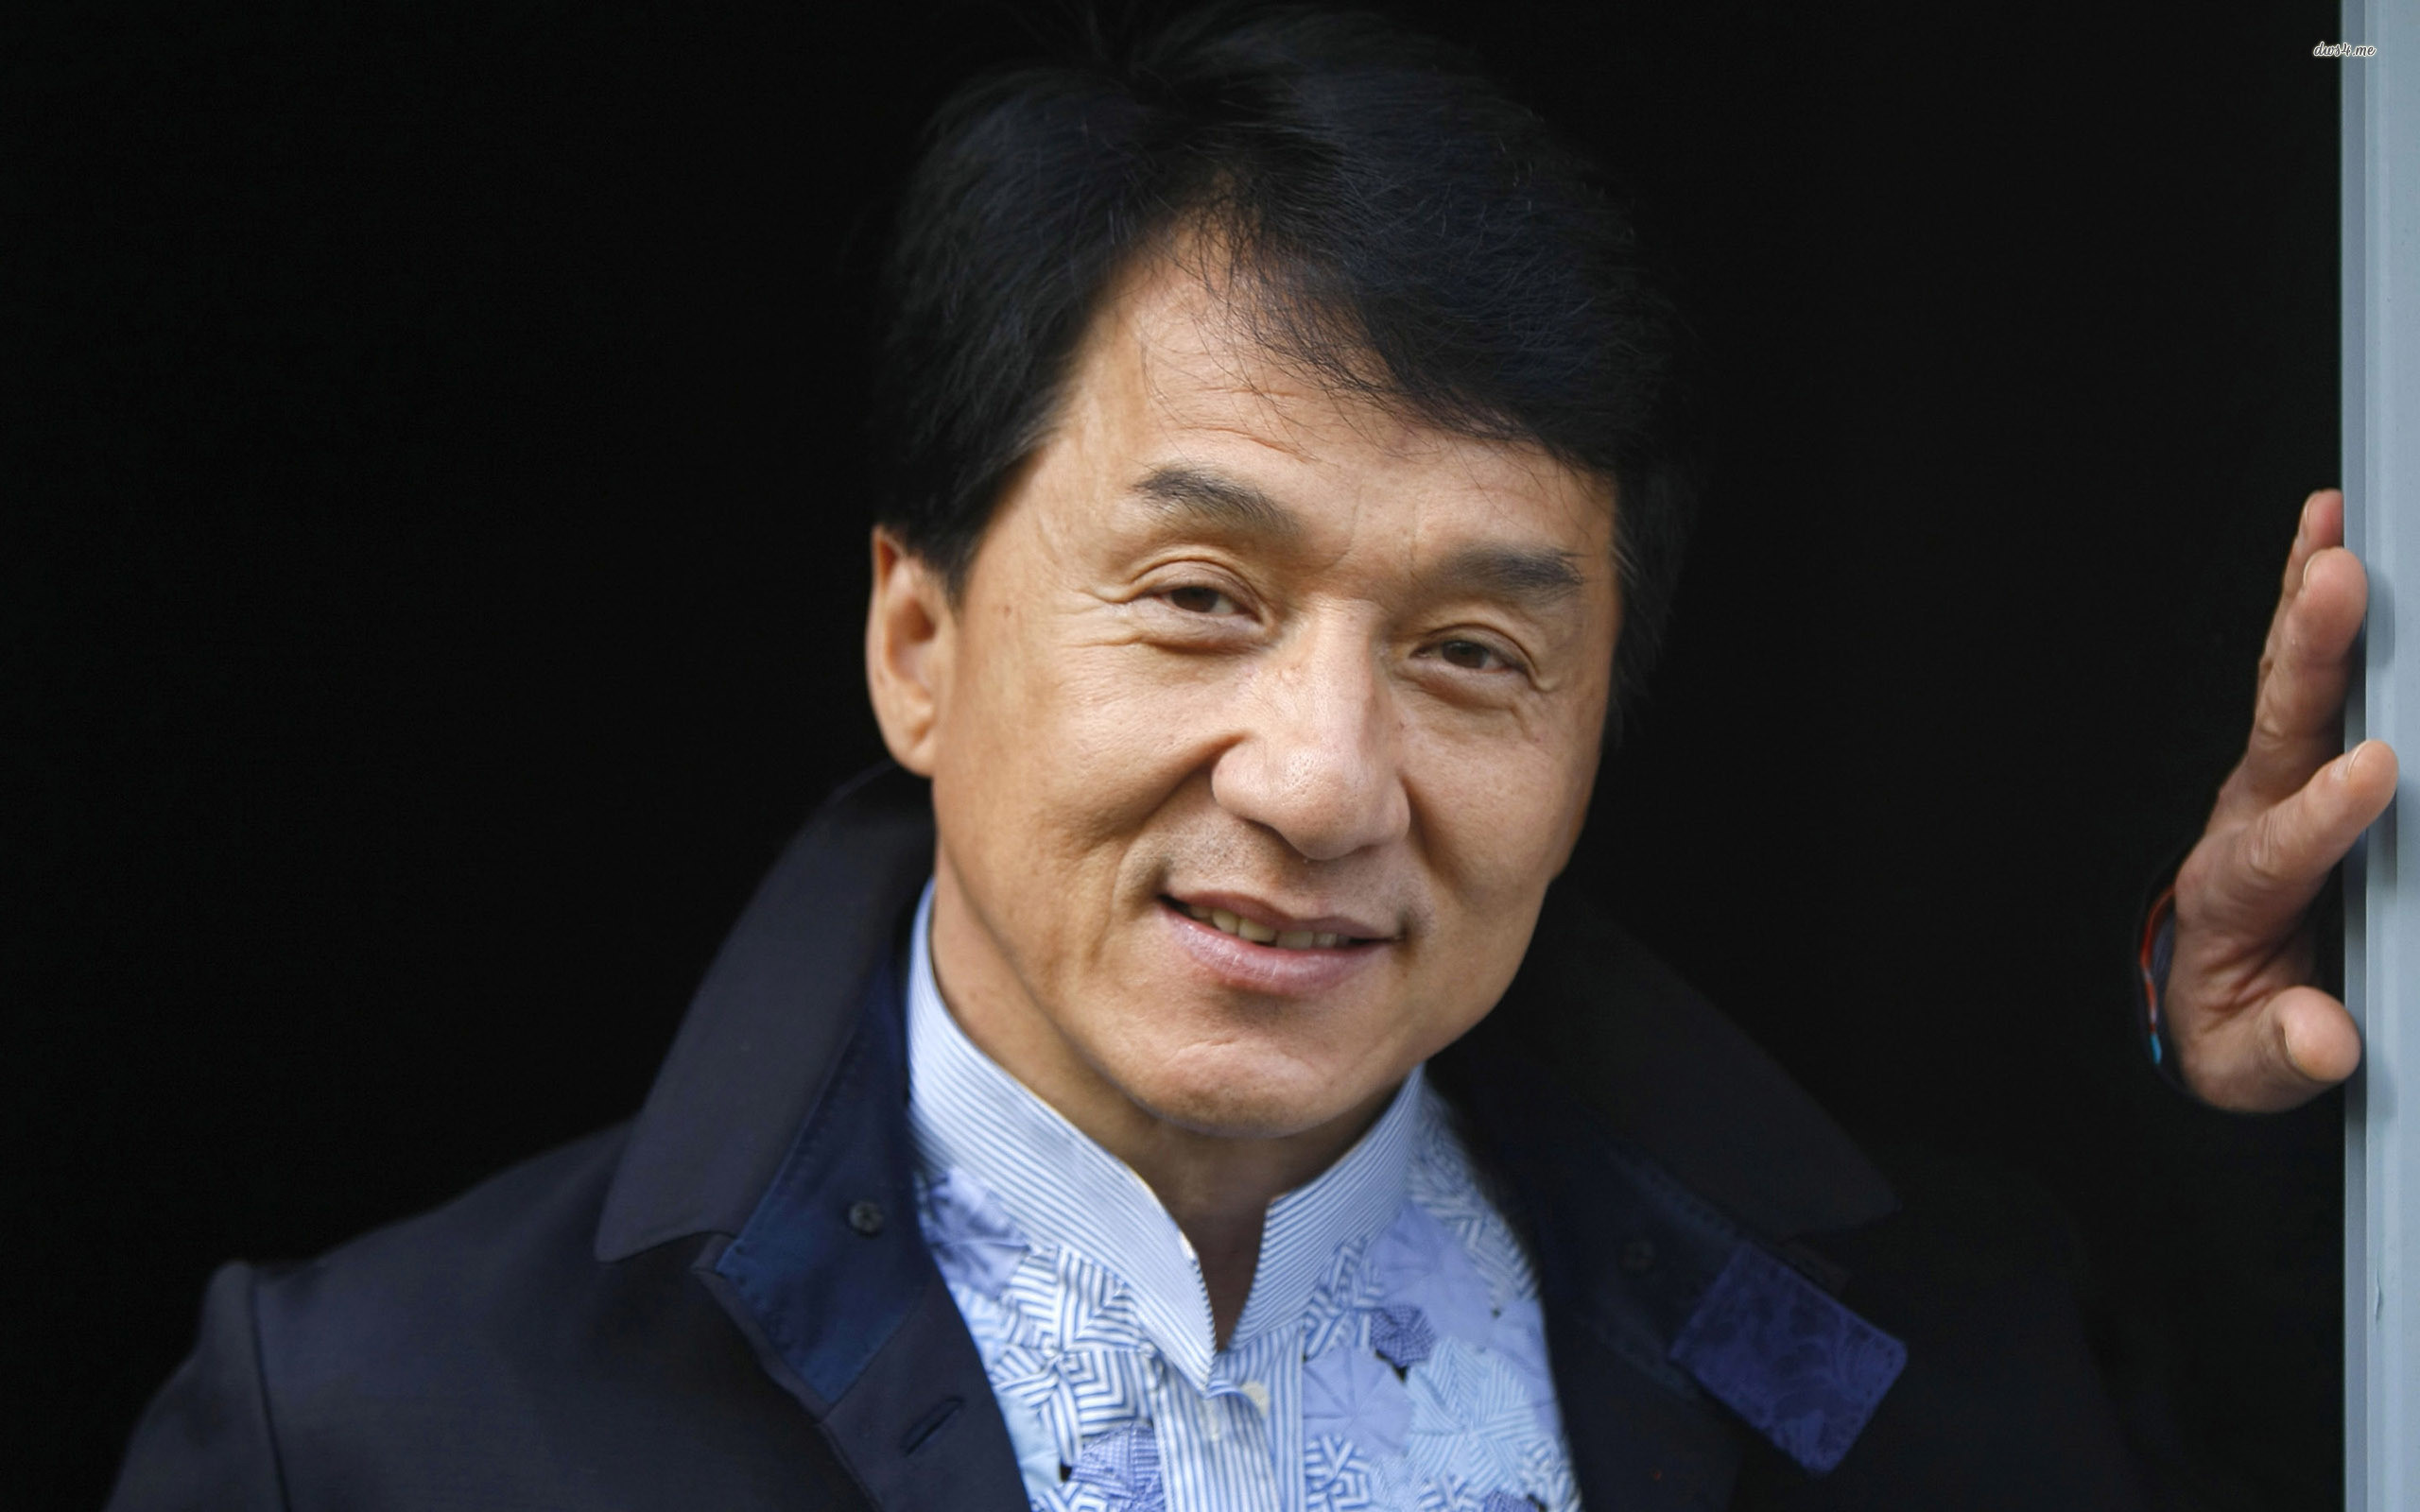 2560x1600 ... Jackie Chan with a dark jacket wallpaper  ...